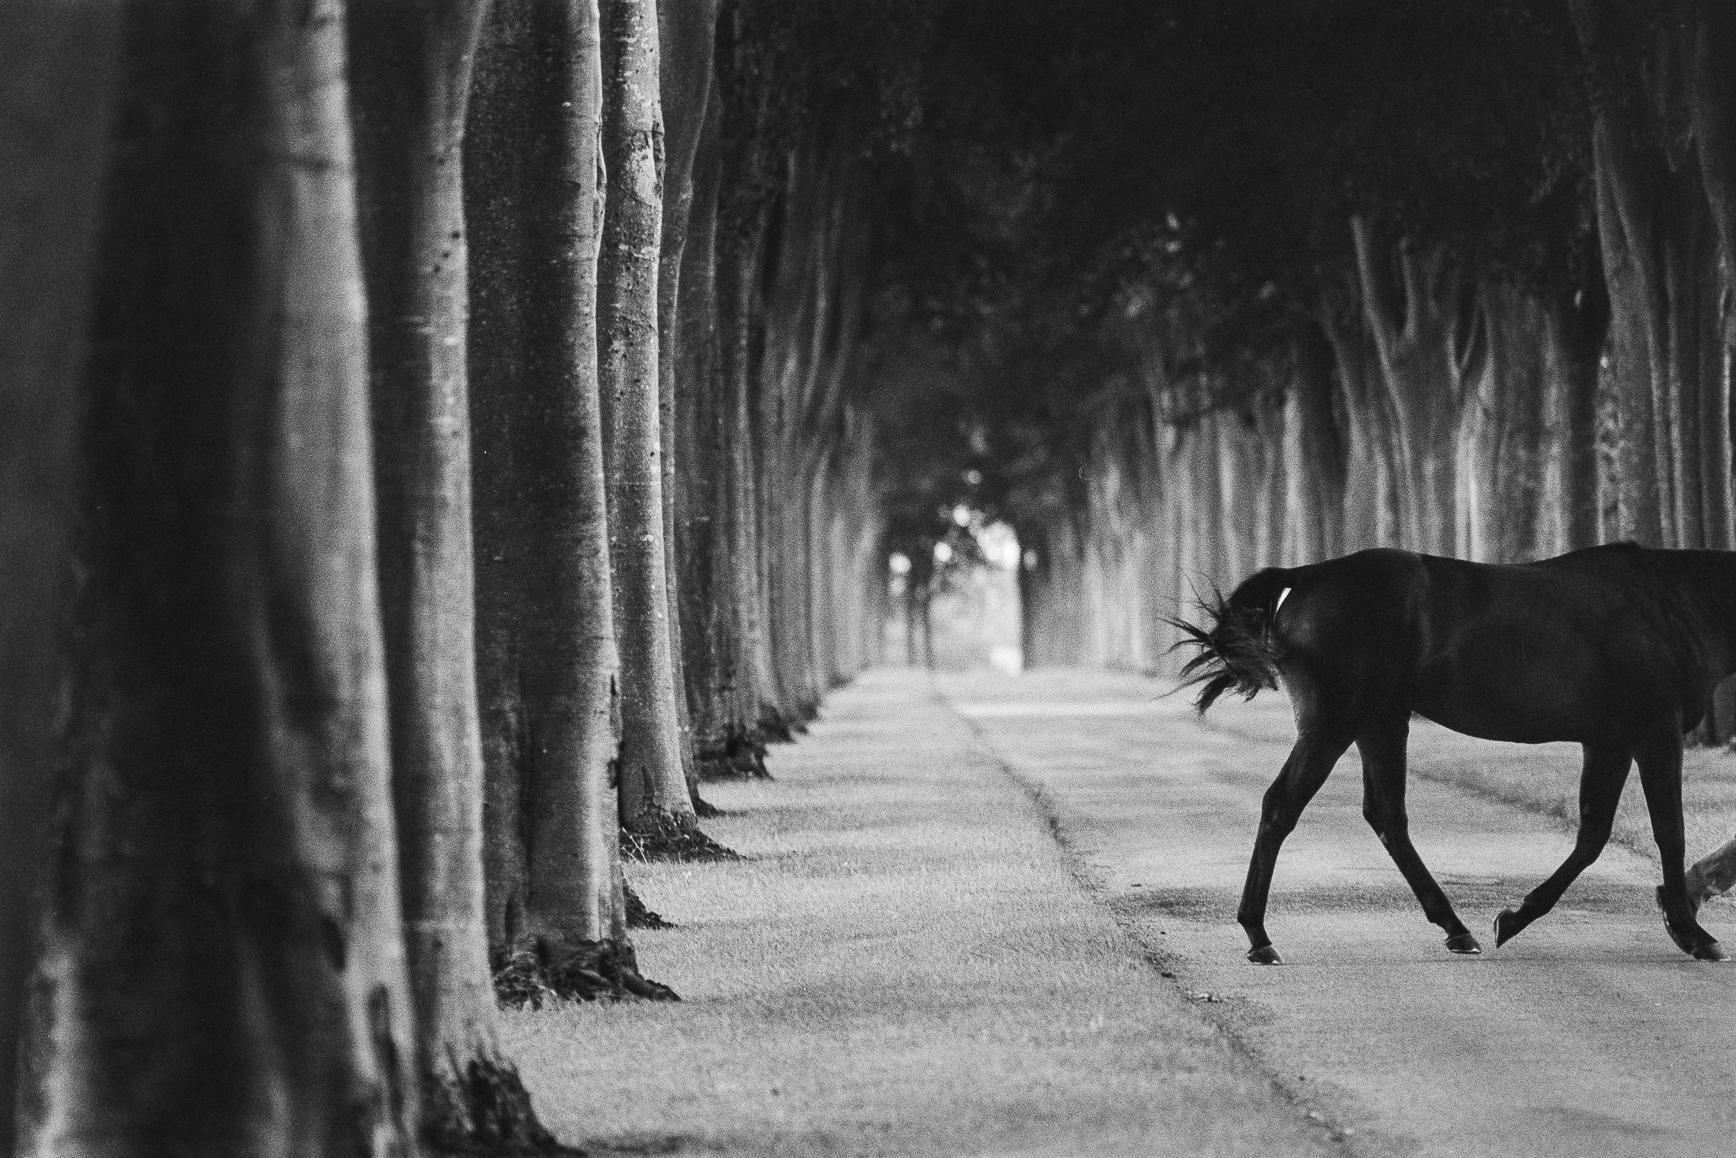 John Reardon Black and White Photograph - Kabool, ‘Avenue of Trees’, Horse Exit, Black and White landscape and a stallion